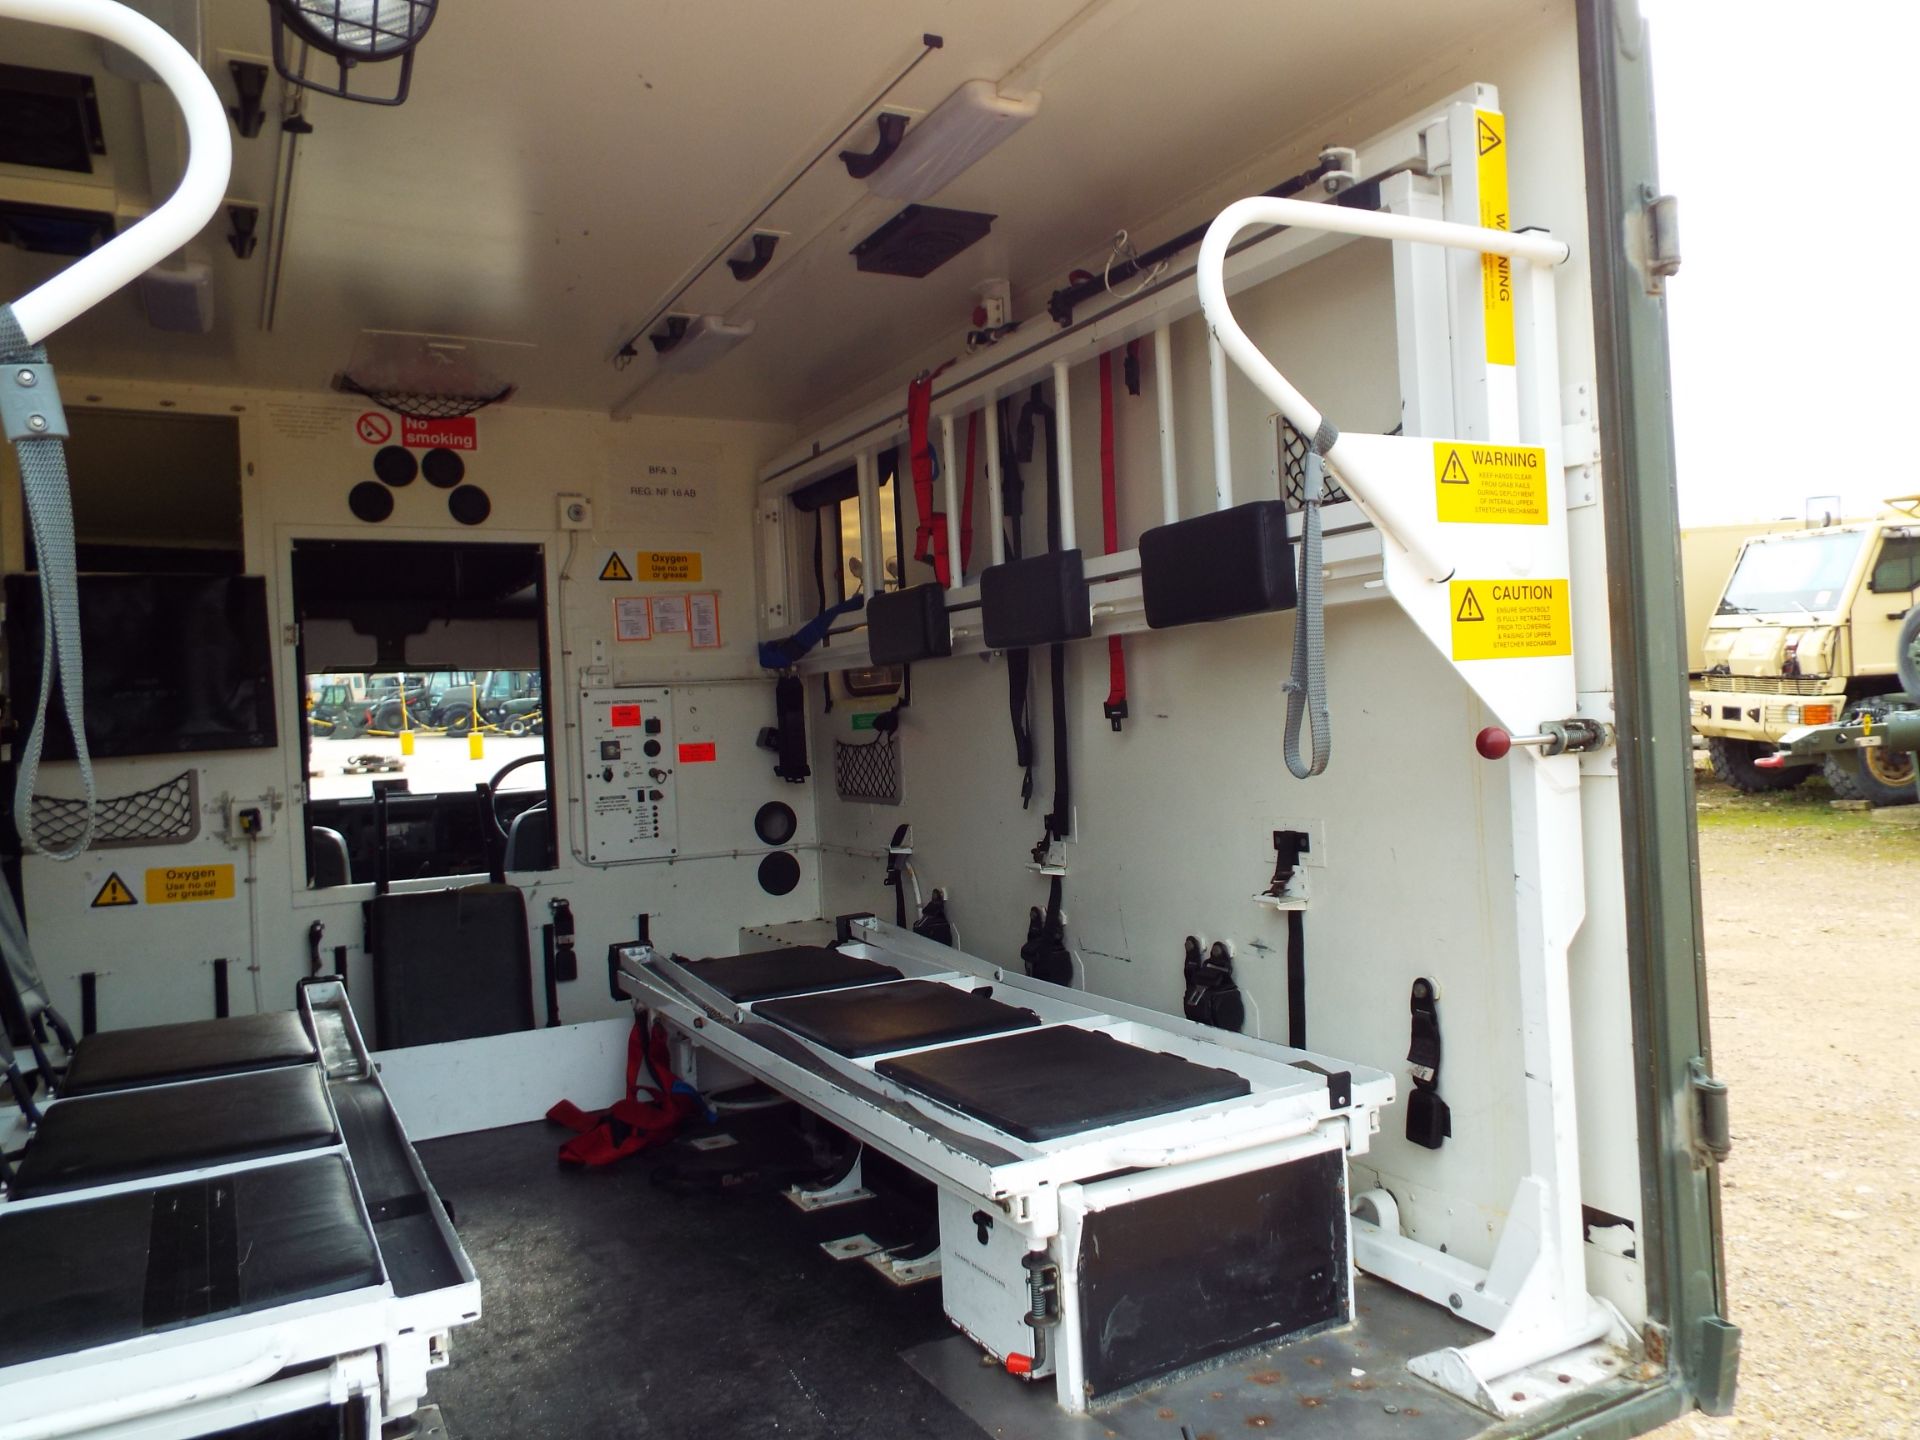 Military Specification Land Rover Wolf 130 ambulance - Image 21 of 28